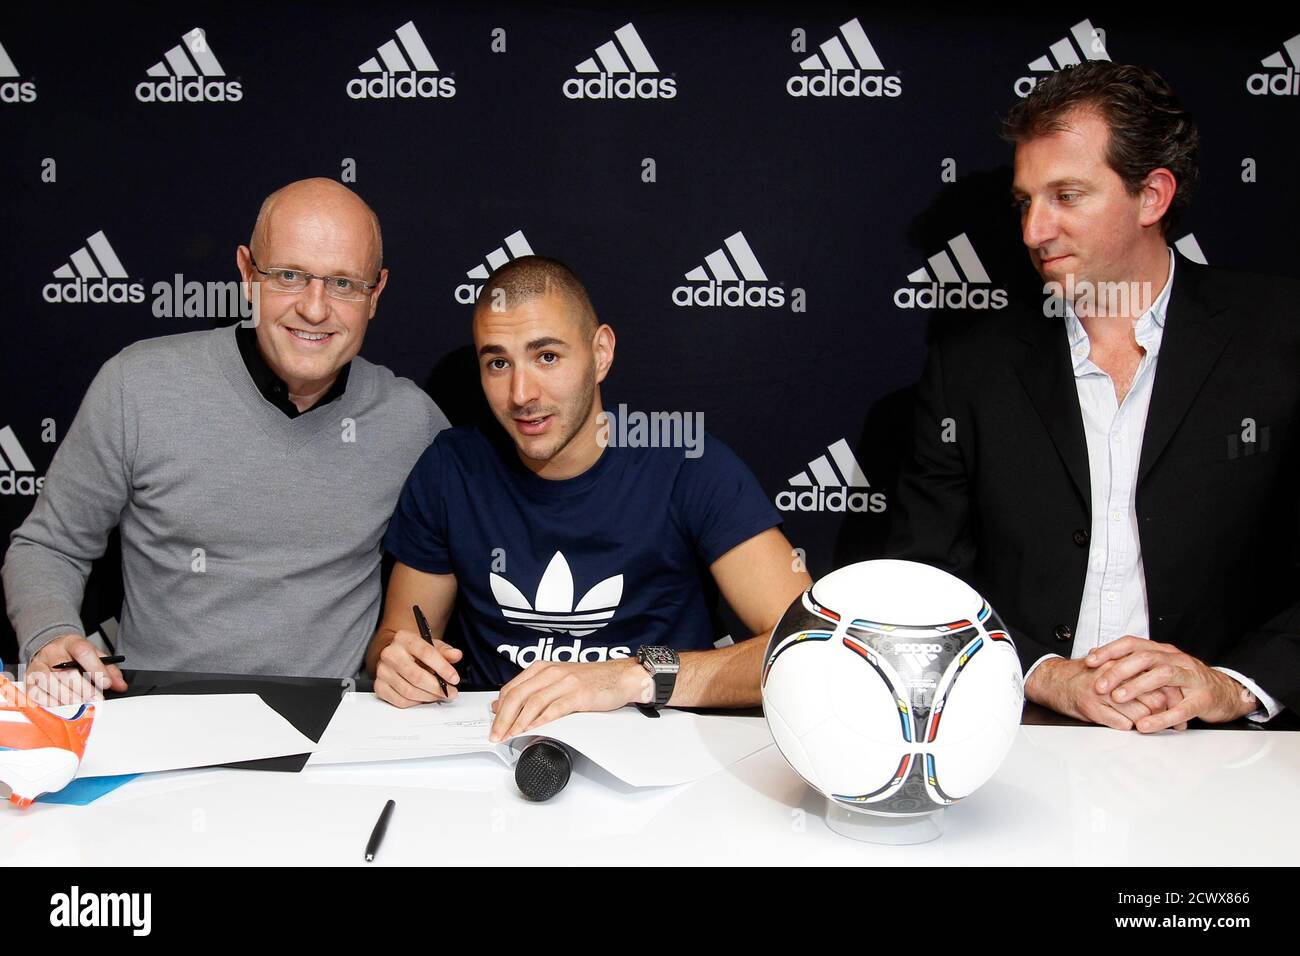 French national soccer team player Karim Benzema (C) poses next to Alain  Pourcelot (L), Brand Director Adidas in France, and Gregory Fernandez, Head  of Football players and scouting at Adidas International, during